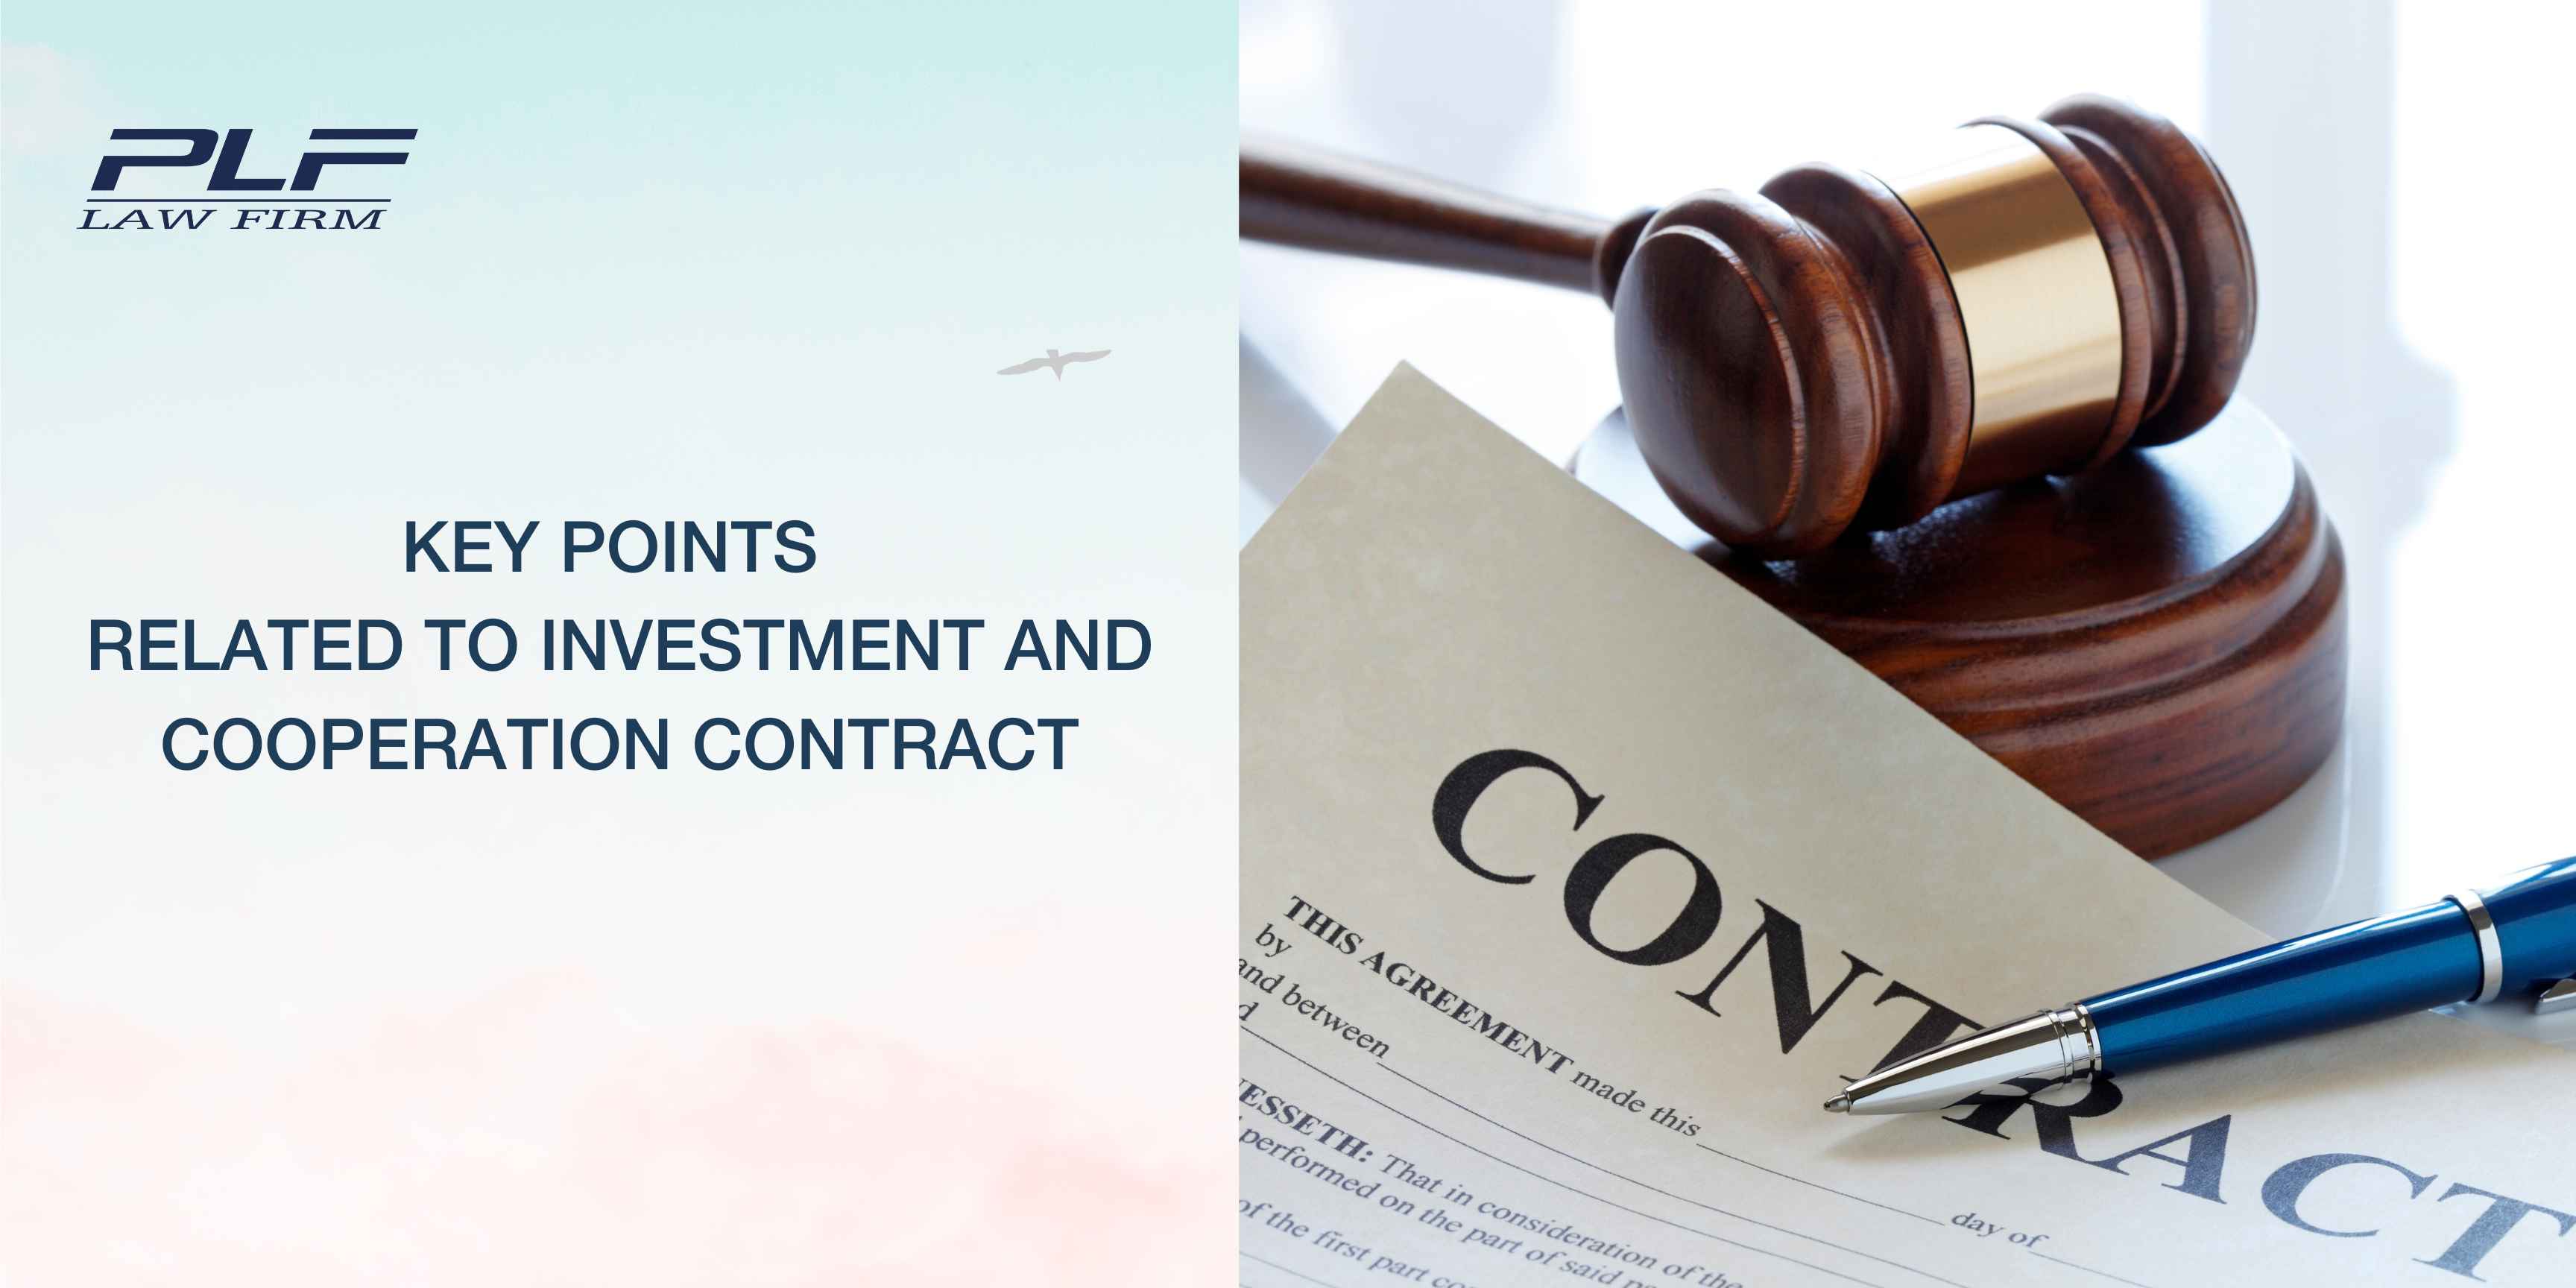 Plf Key Points Related To Investment And Cooperation Contract